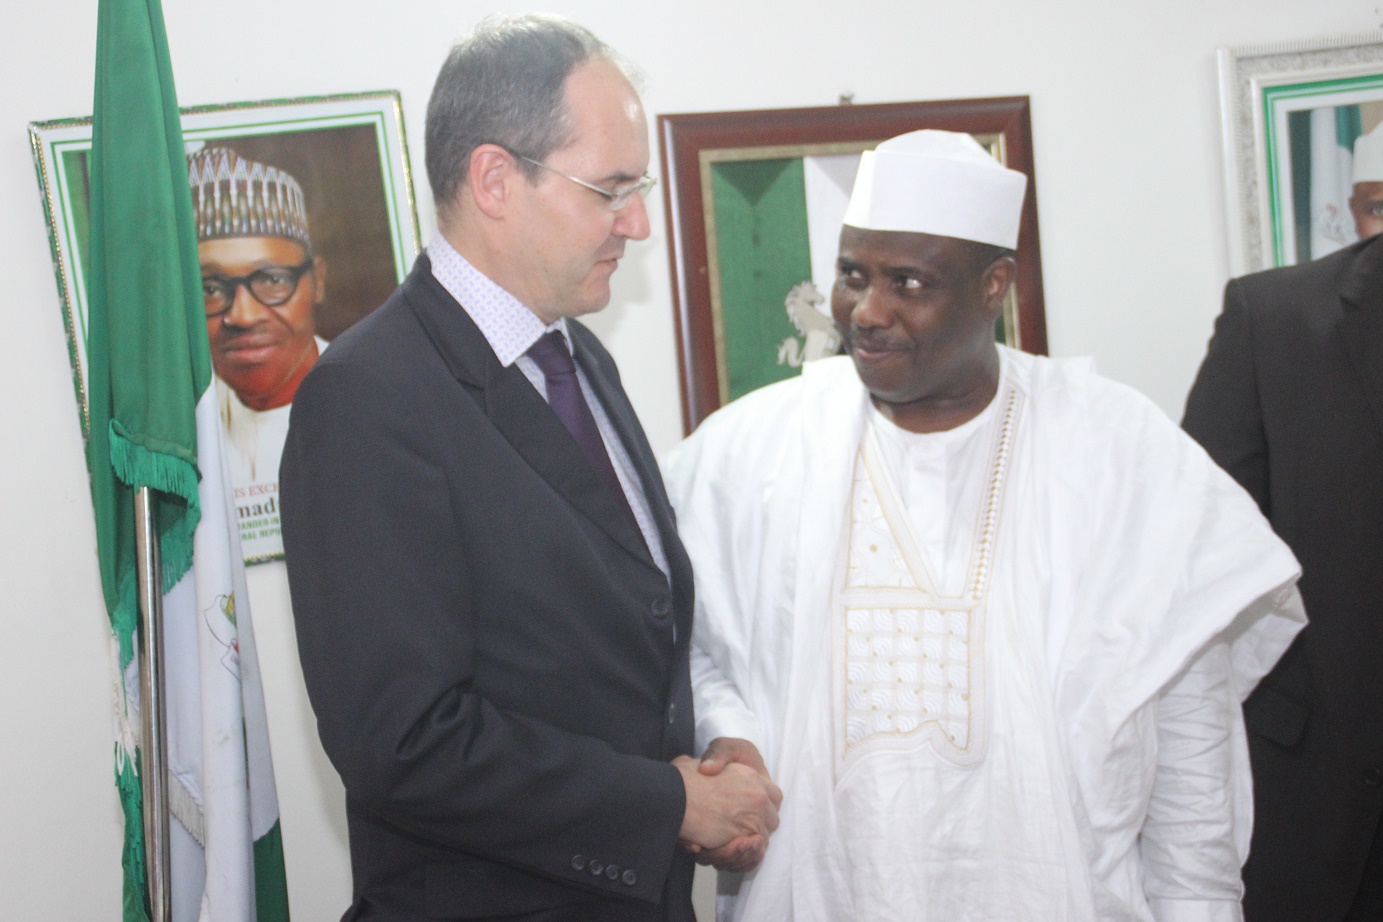 TALKING FOREIGN INVESTMENT: Sokoto State Governor, Aminu Waziri Tambuwal, with the Country Mission Director of the French Government's Investment Agency AFD, Mr. Olivier Dellefosse, at a Business Opportunity Forum organised by Sokoto State Government in Abuja